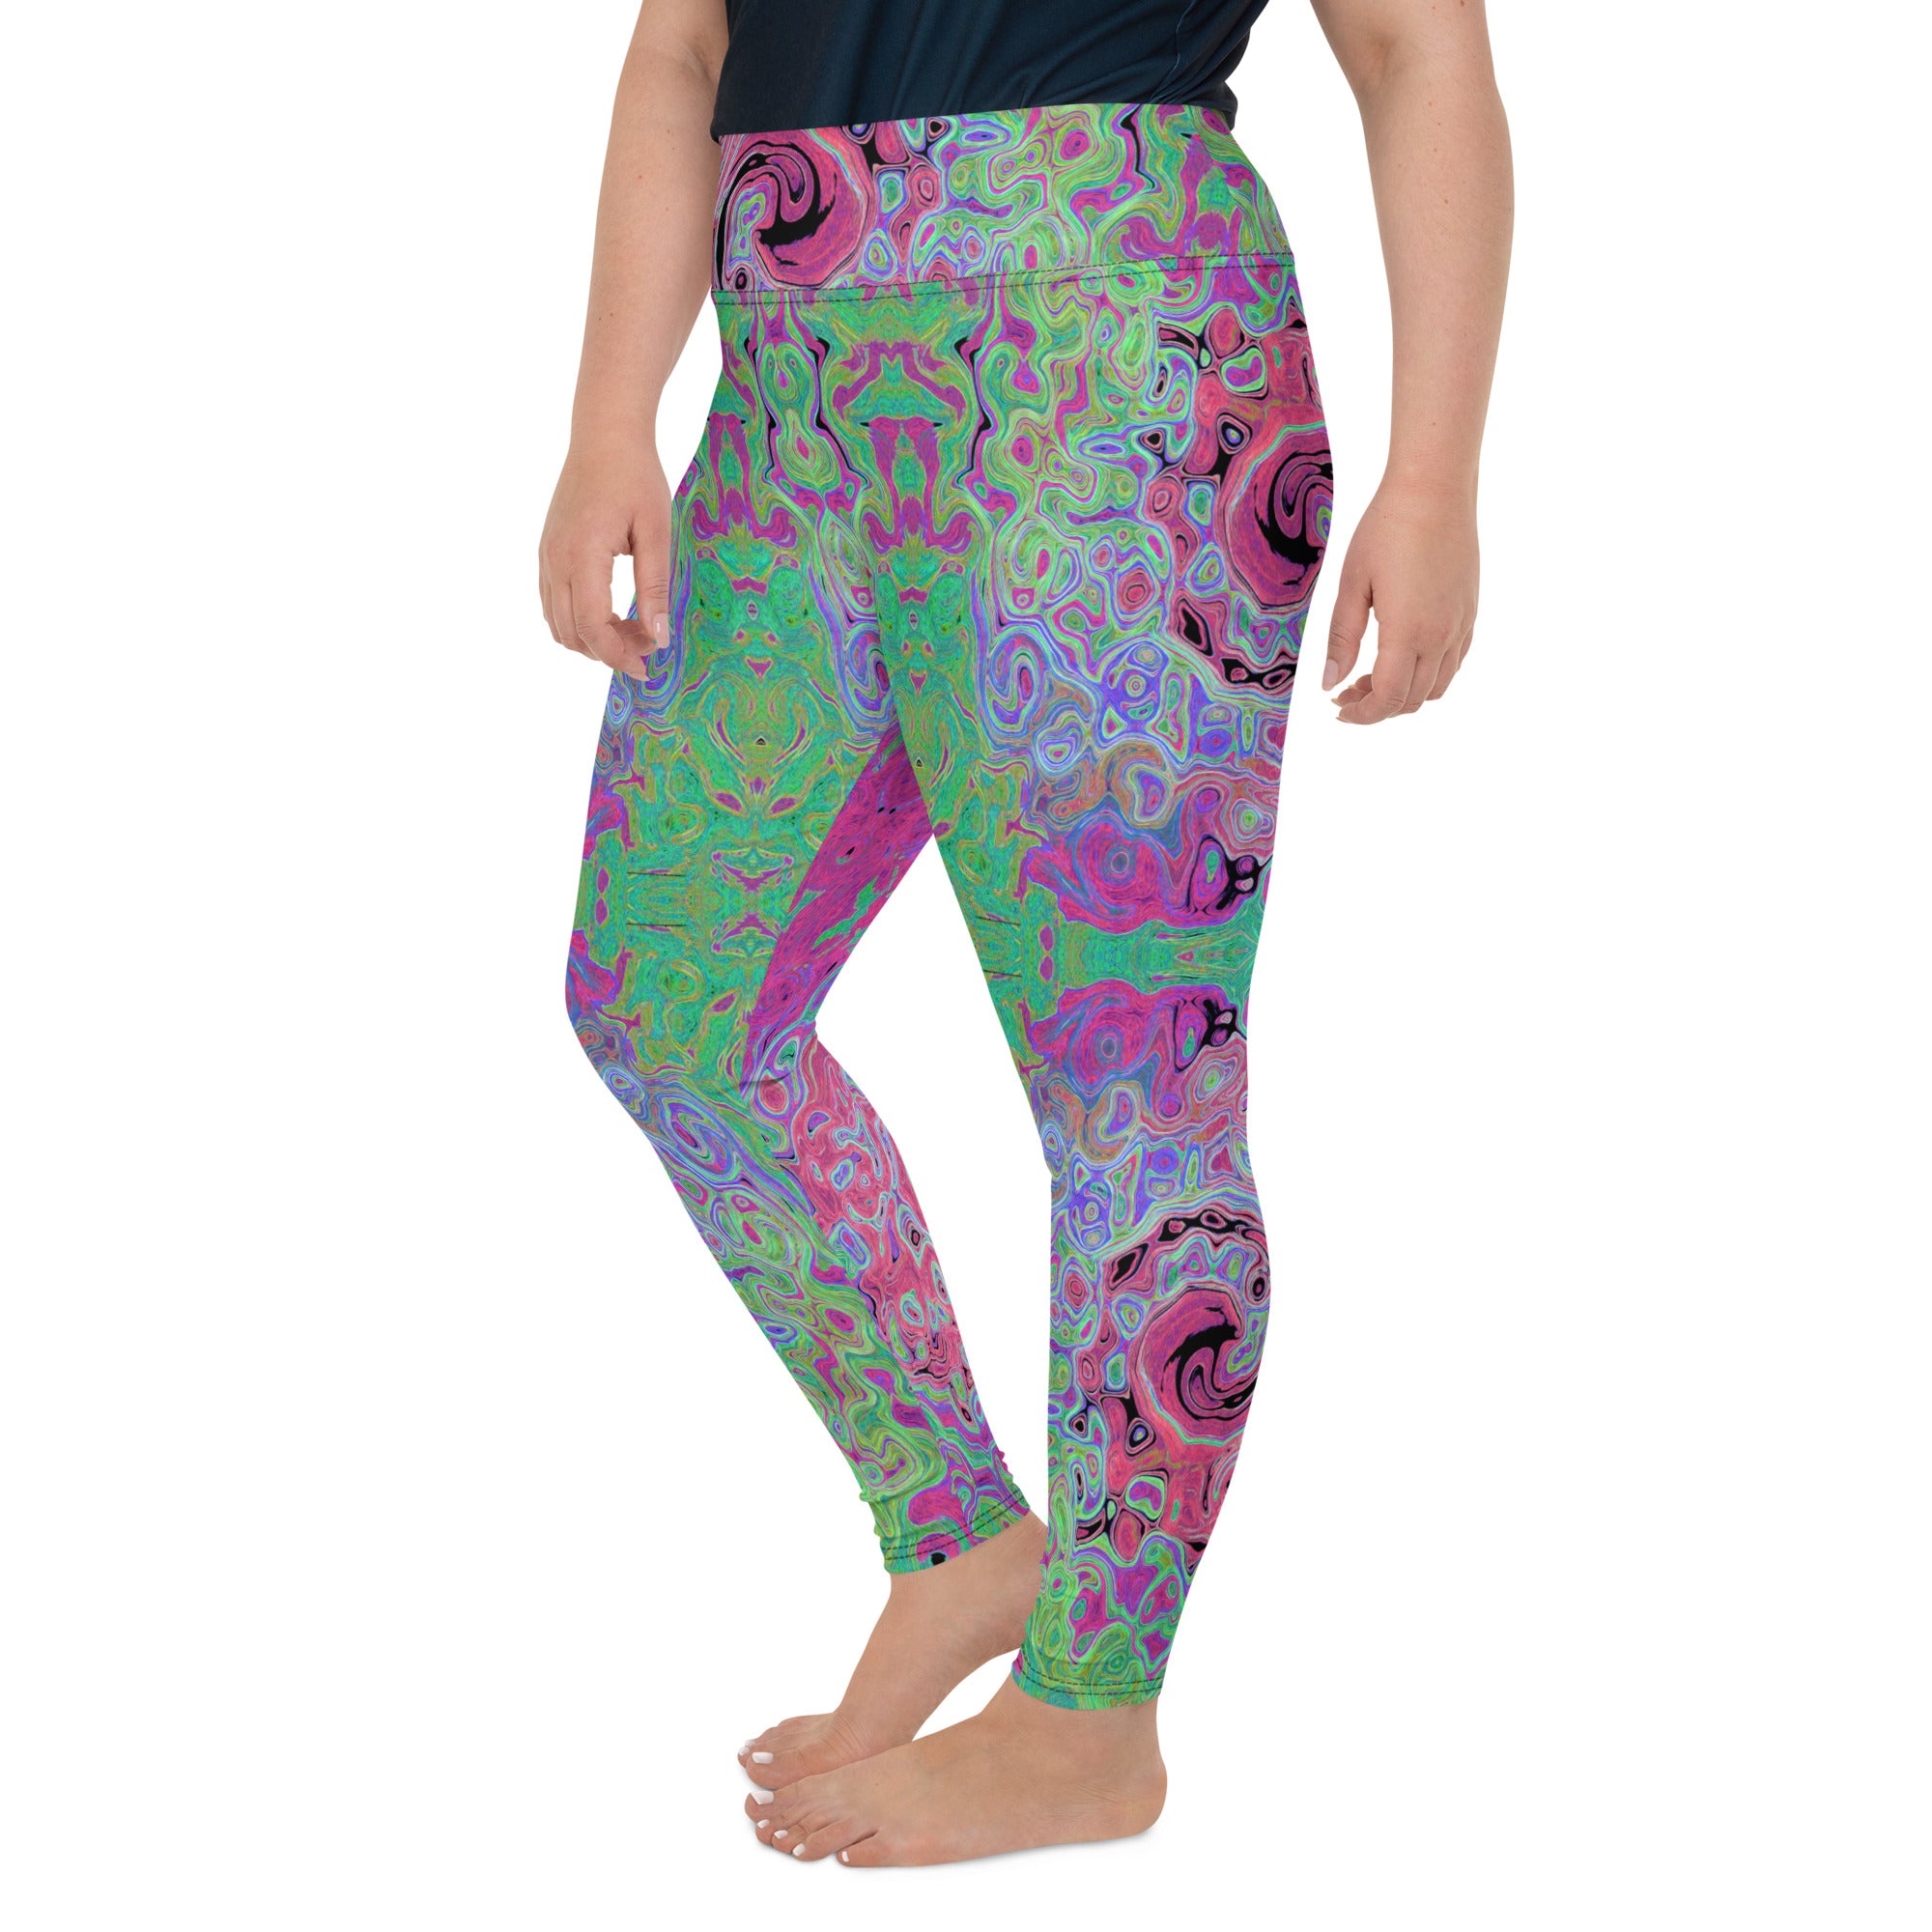 Plus Size Leggings - Pink and Lime Green Groovy Abstract Retro Swirl